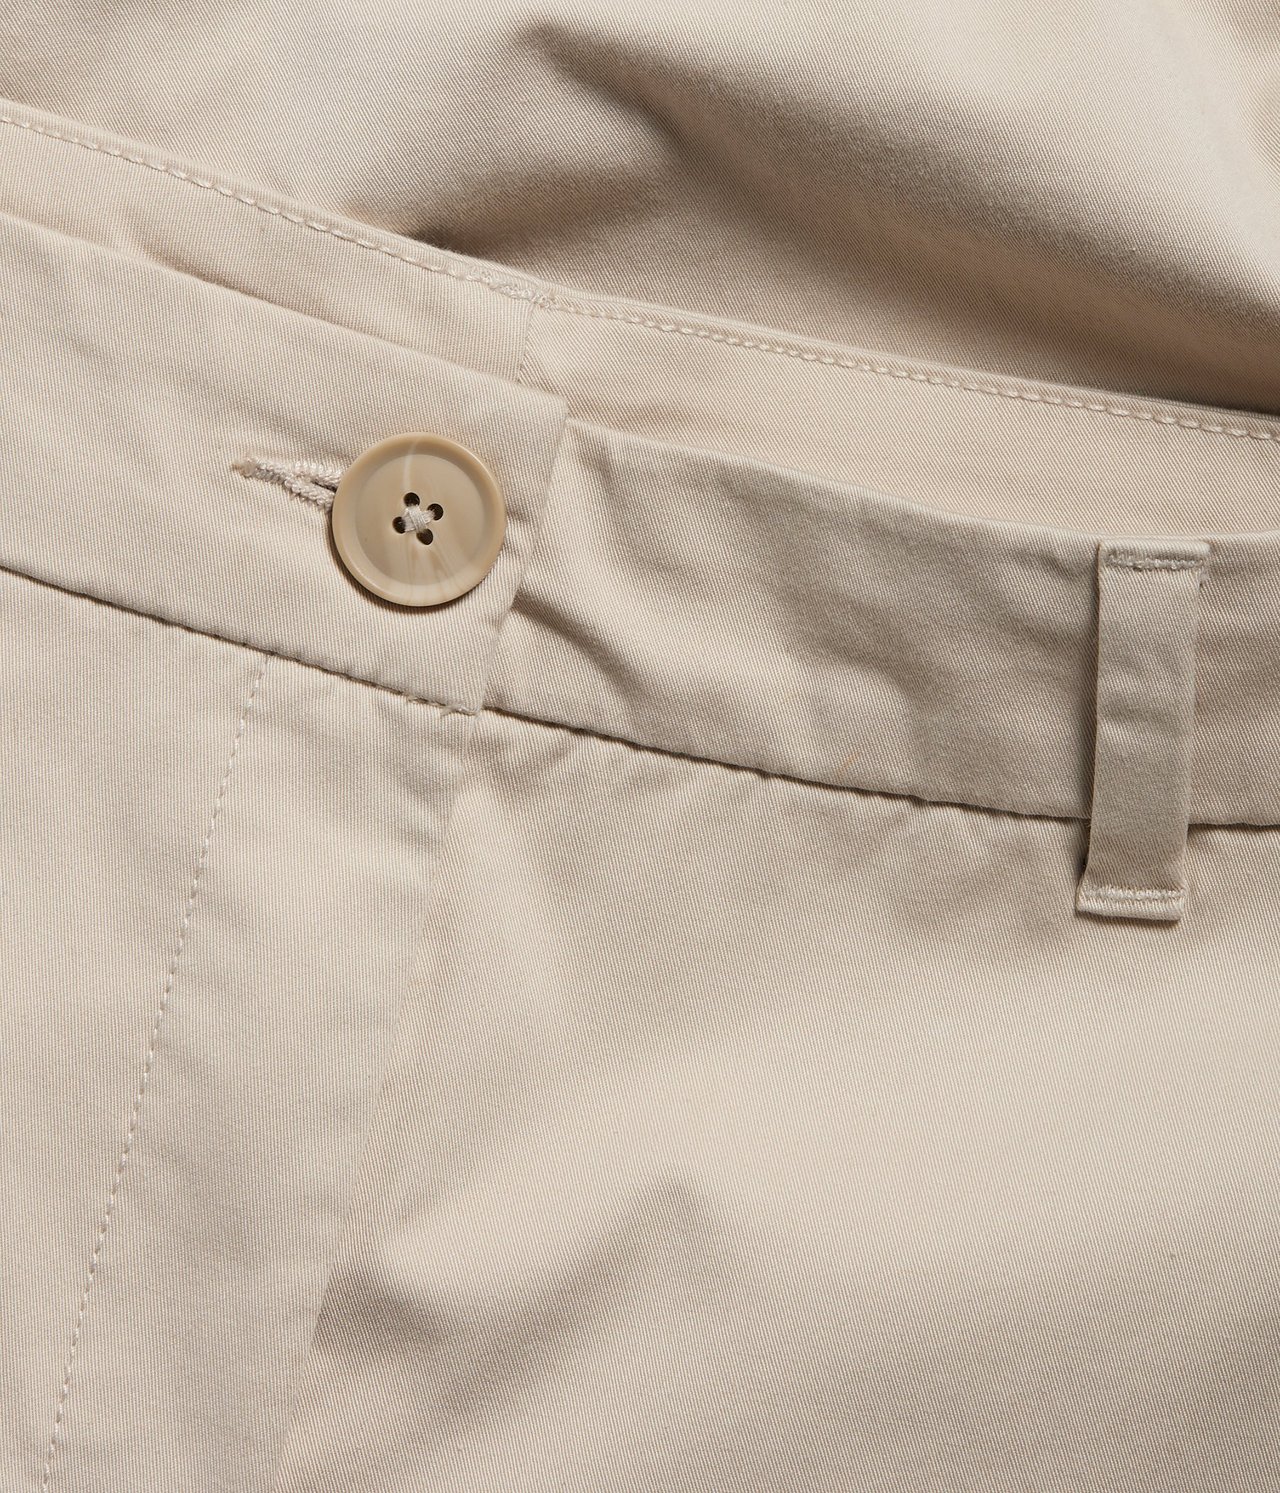 Chinos Offwhite - null - 5